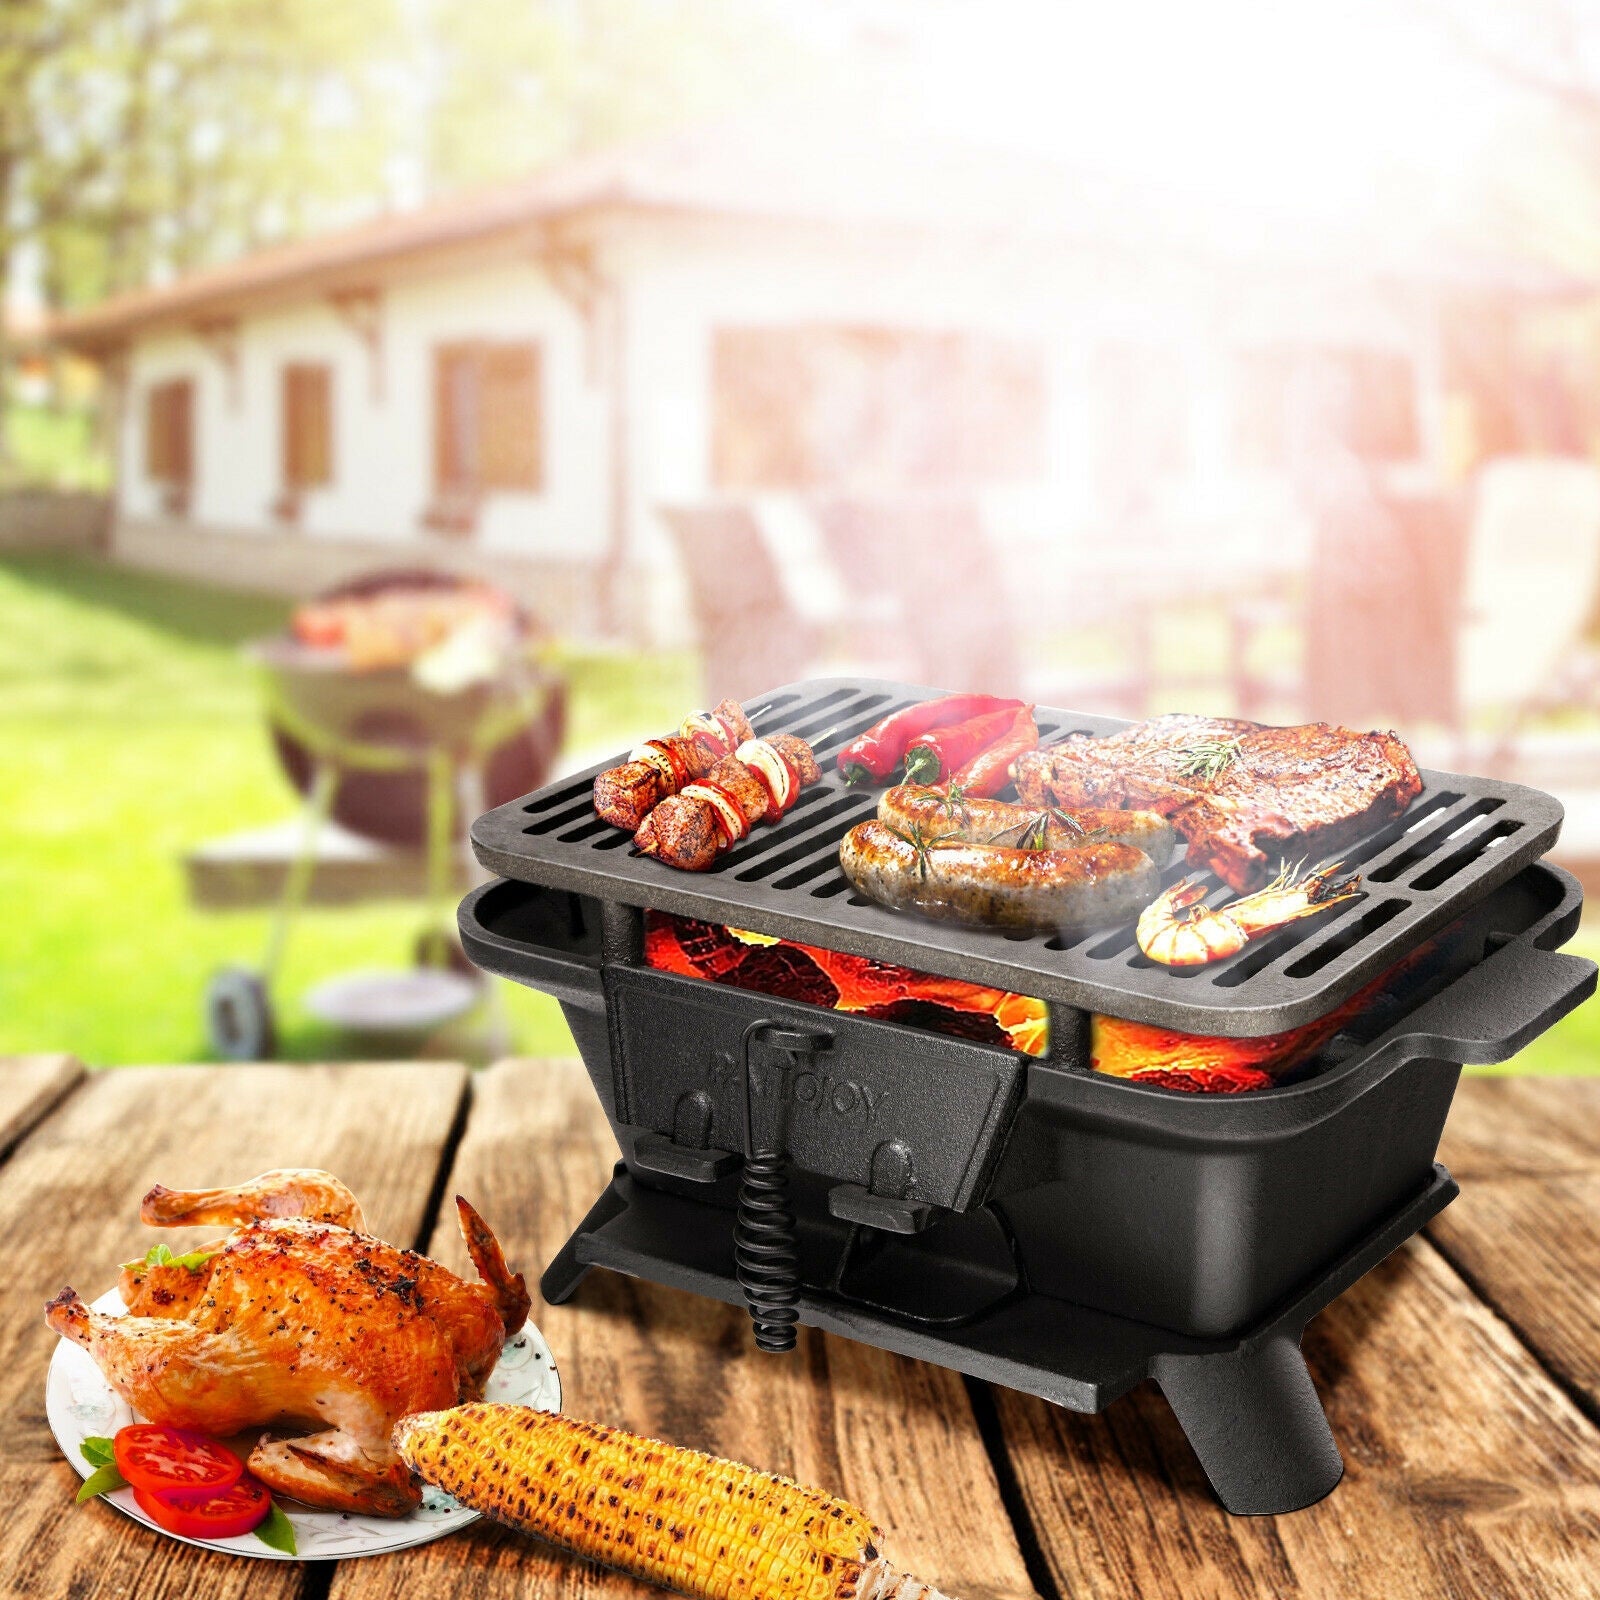 Heavy Duty Cast Iron Tabletop BBQ Grill Stove with Two Different Heights for Camping Picnic